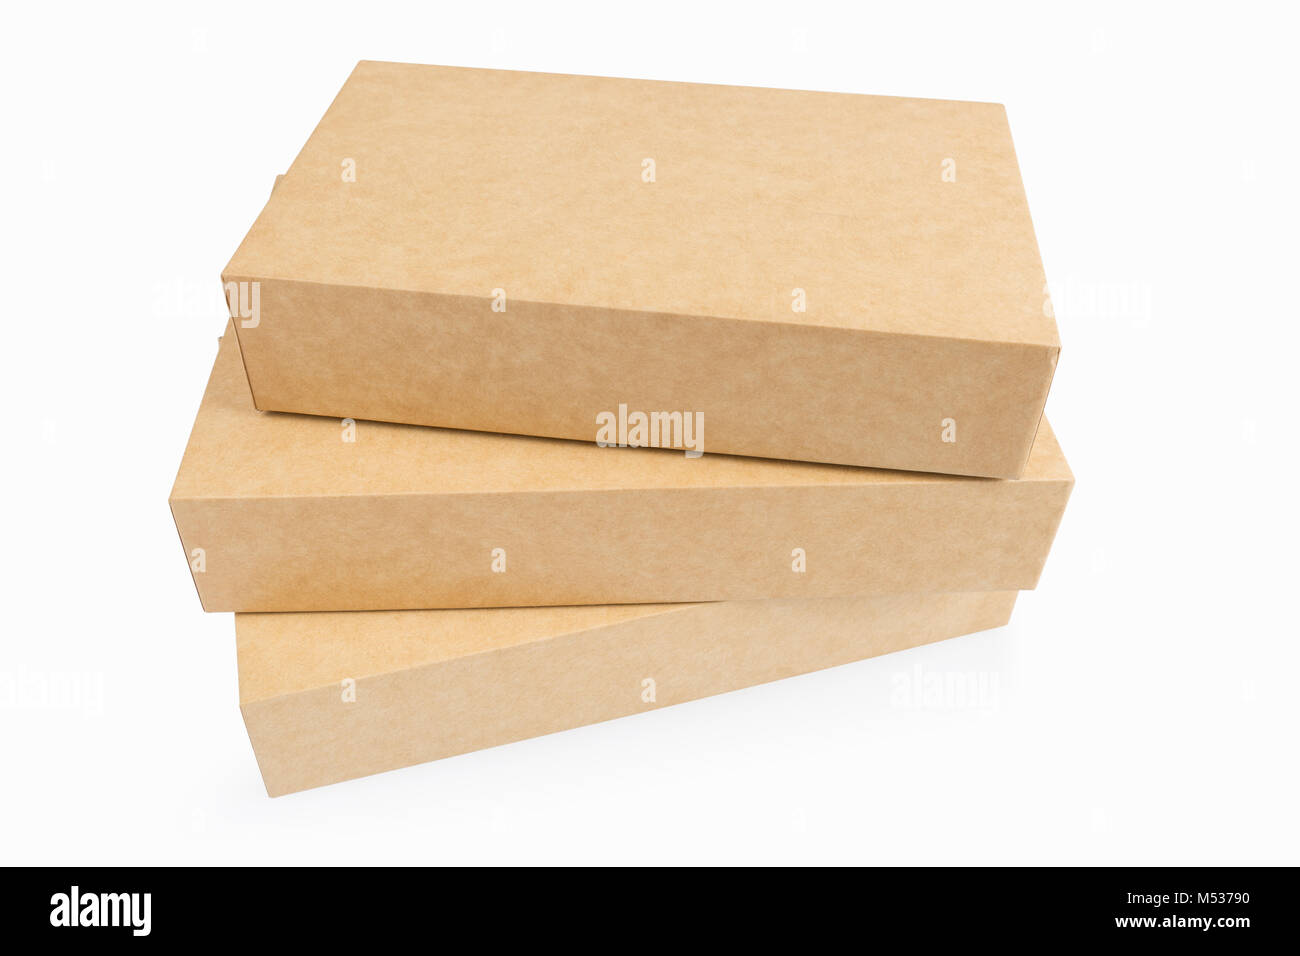 three kraft paper boxes isolated Stock Photo